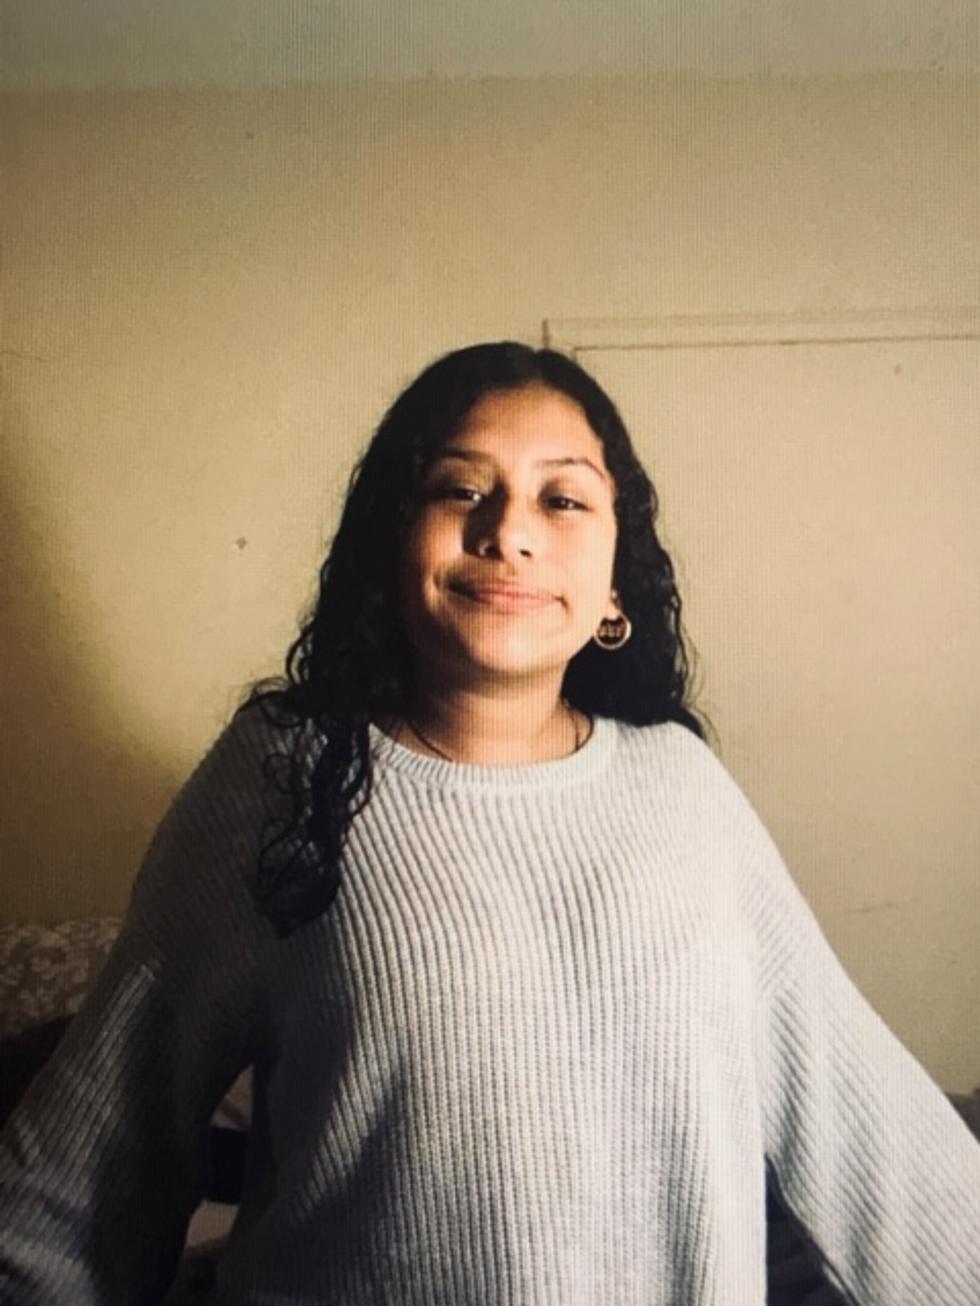 FOUND: 12-Year-Old Girl Has Been Found, Police Say